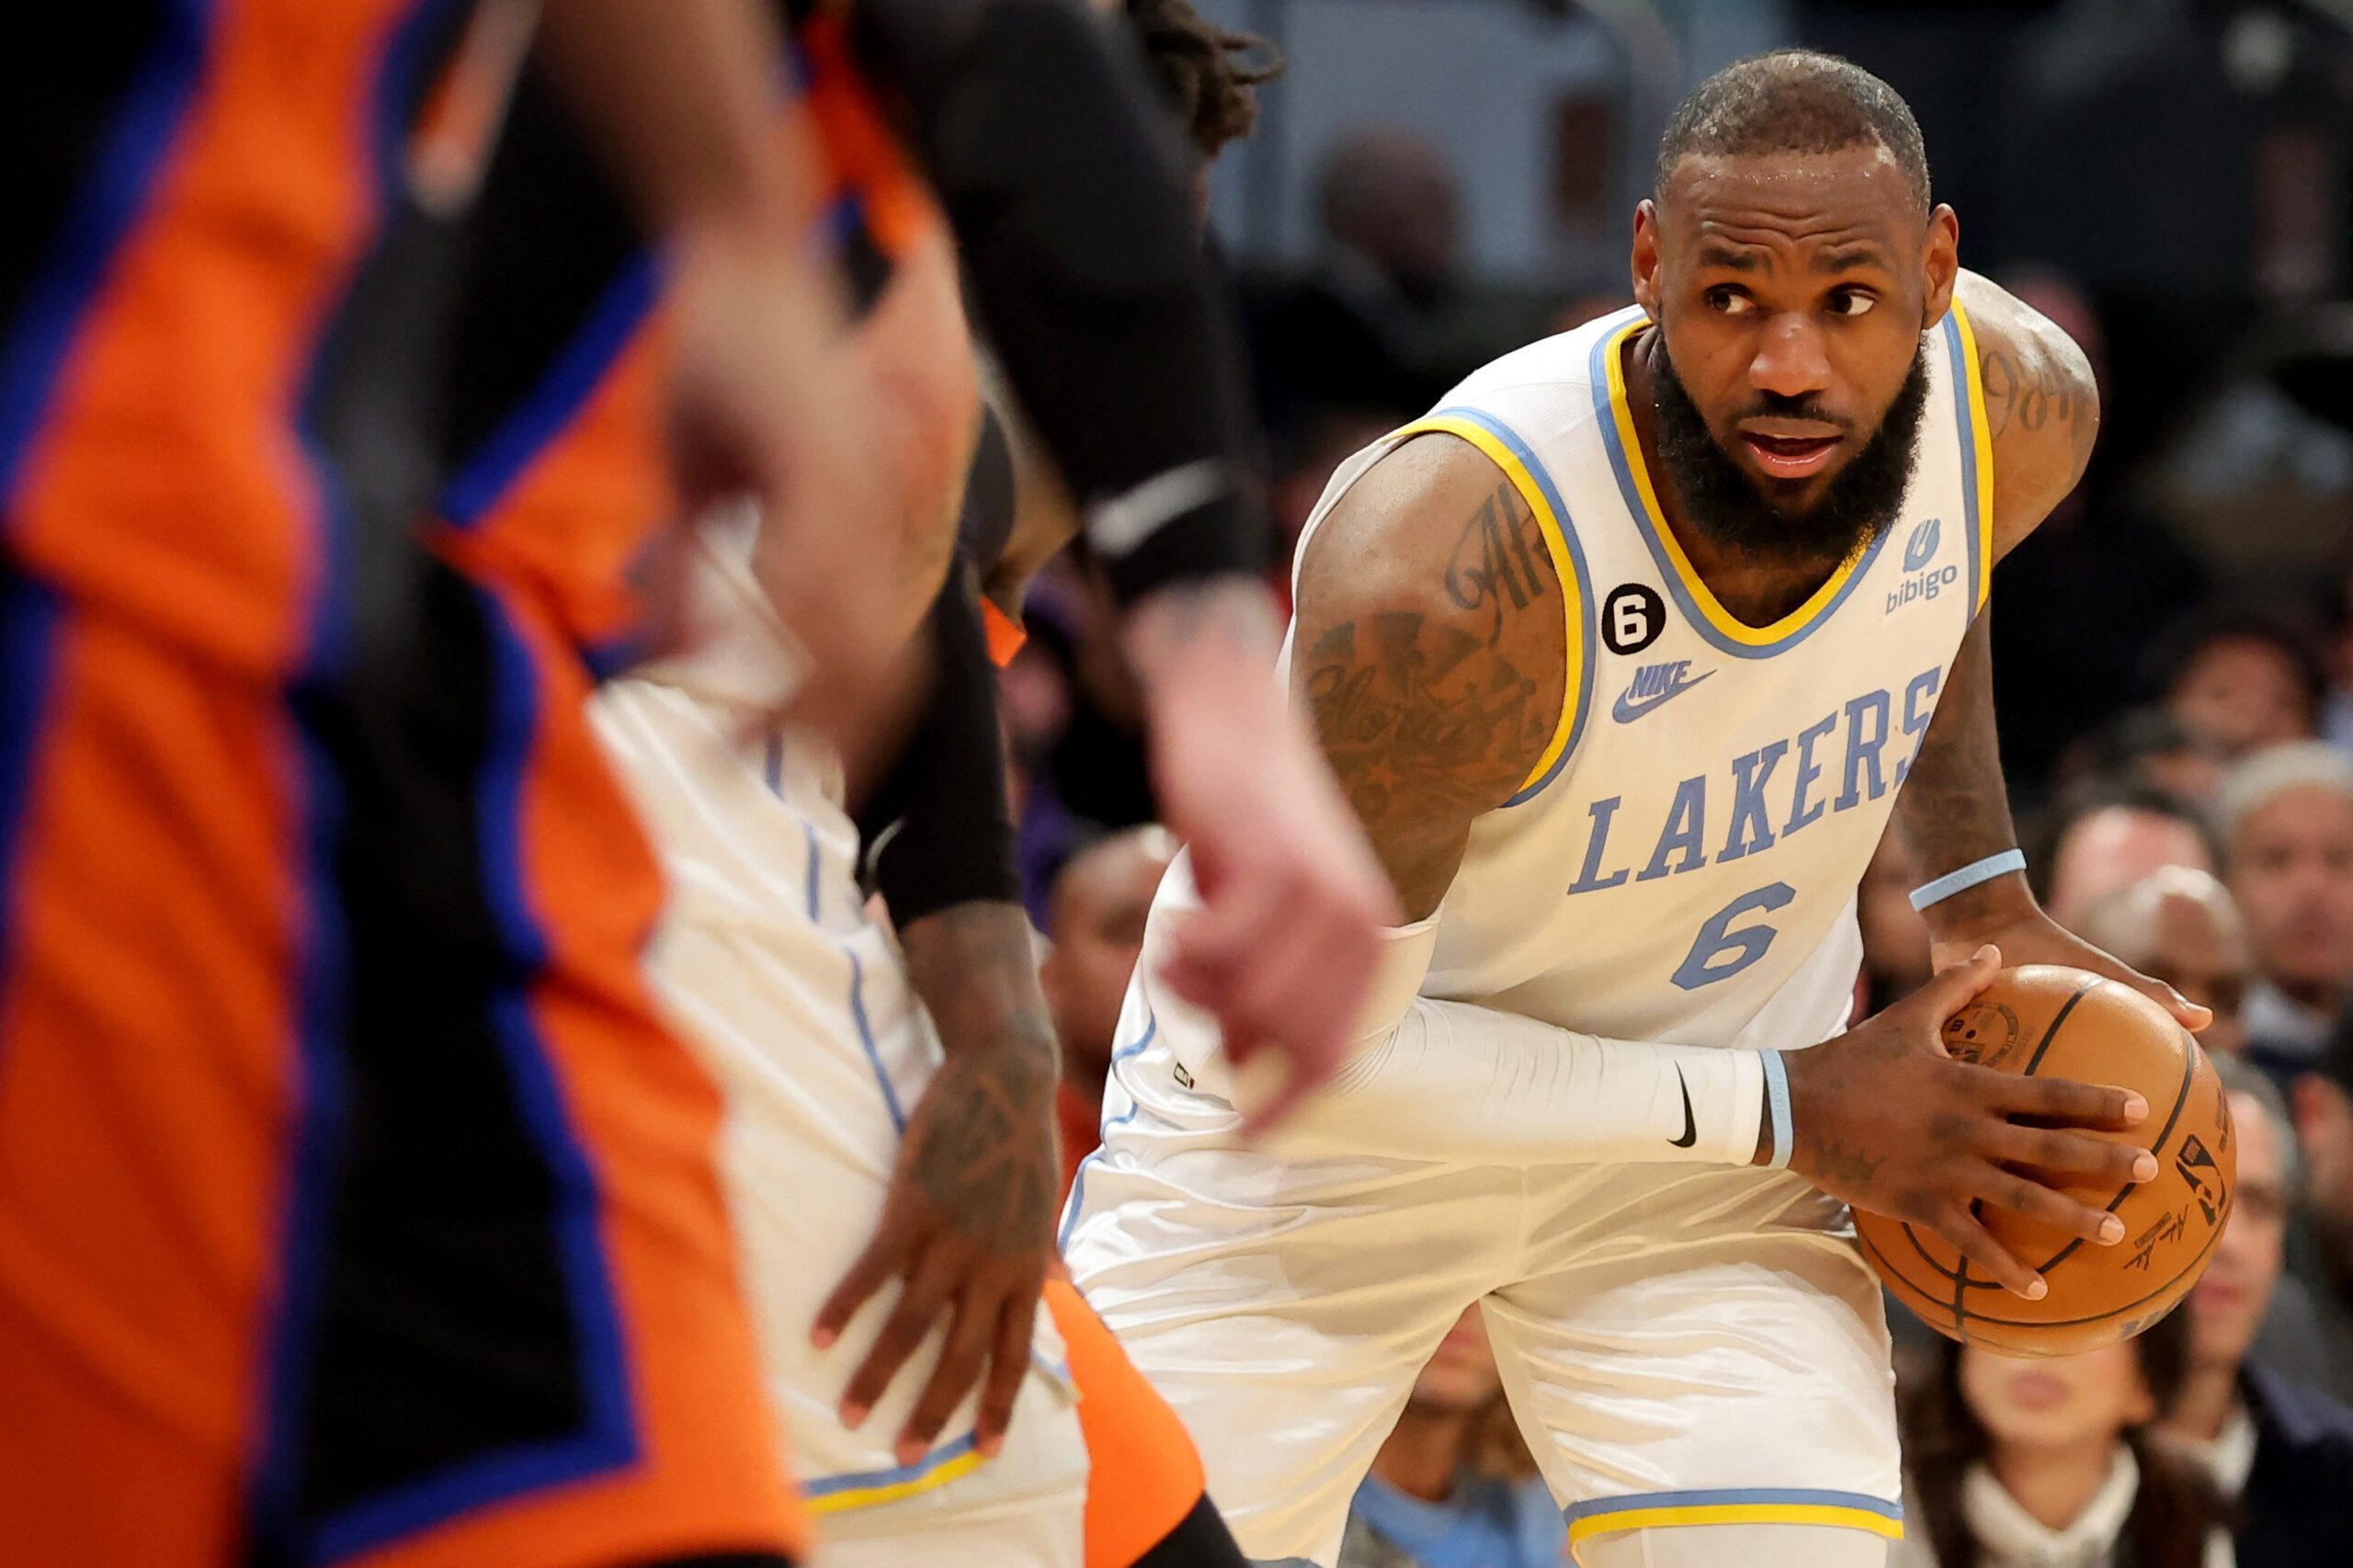 LeBron James’ triple-double sends Lakers past Knicks in overtime